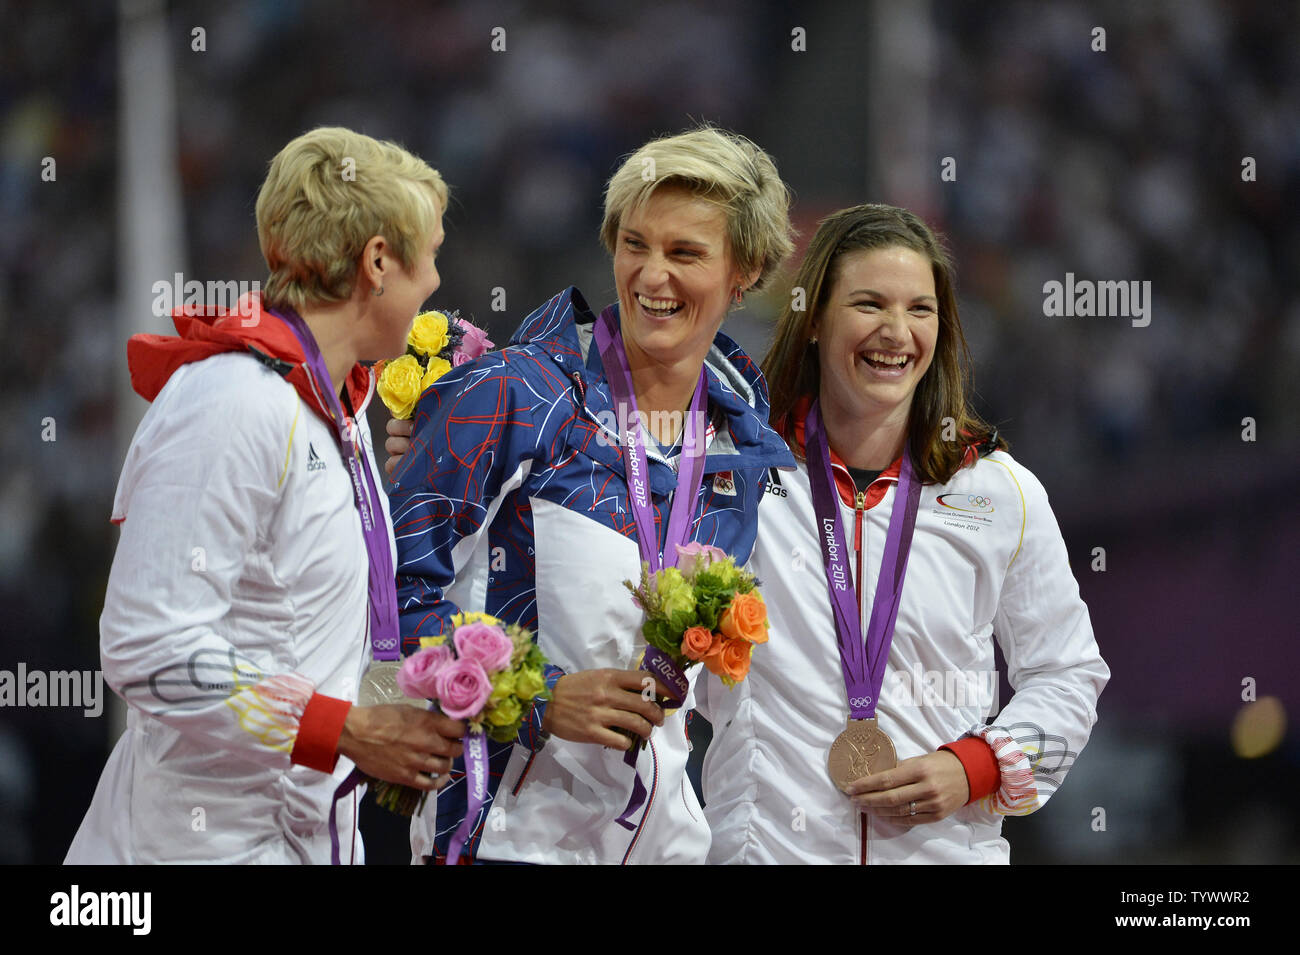 Silver Medalist Christina Obergfoll of Germany, (L-R) Gold Medalist Barbora Spotakova of the Czech Republic and Linda Stahl of Germany laugh during the Victory Ceremony for the Women's Javelin Throw at the London 2012 Summer Olympics on August 10, 2012 in Stratford, London. Spotakova won Gold with a throw of 69.55M while Obergfoll hit a mark of 65.16 and Stahl threw a season-best 64.91 in the final.      UPI/Brian Kersey Stock Photo